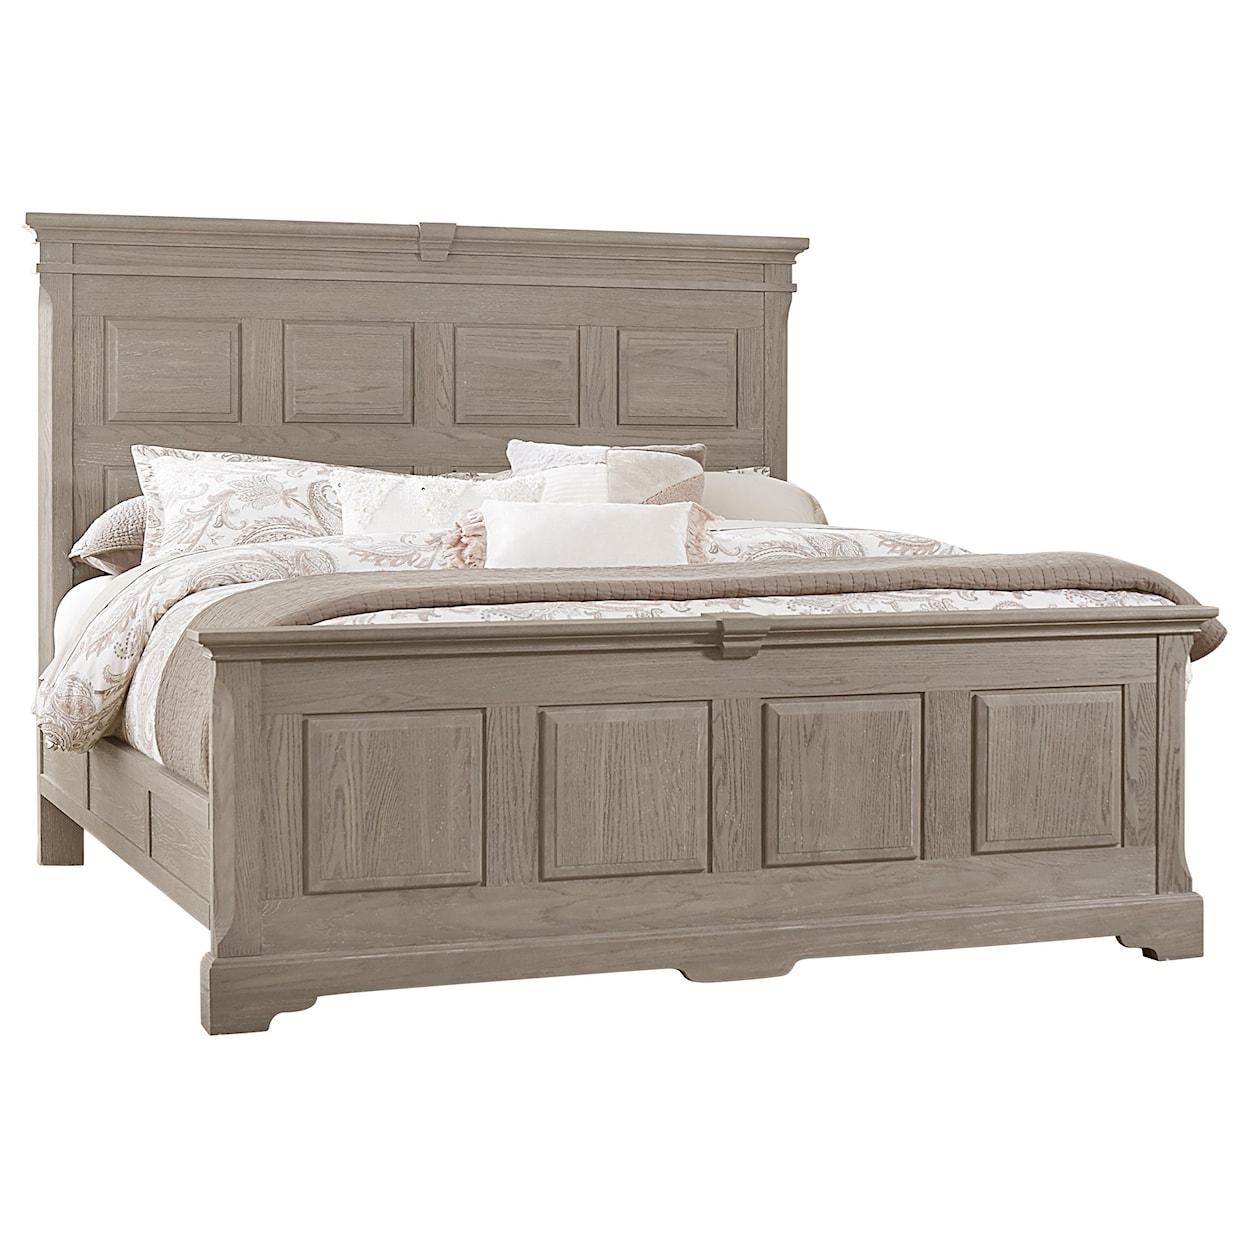 Artisan & Post Heritage King Mansion Bed with Decorative Side Rails